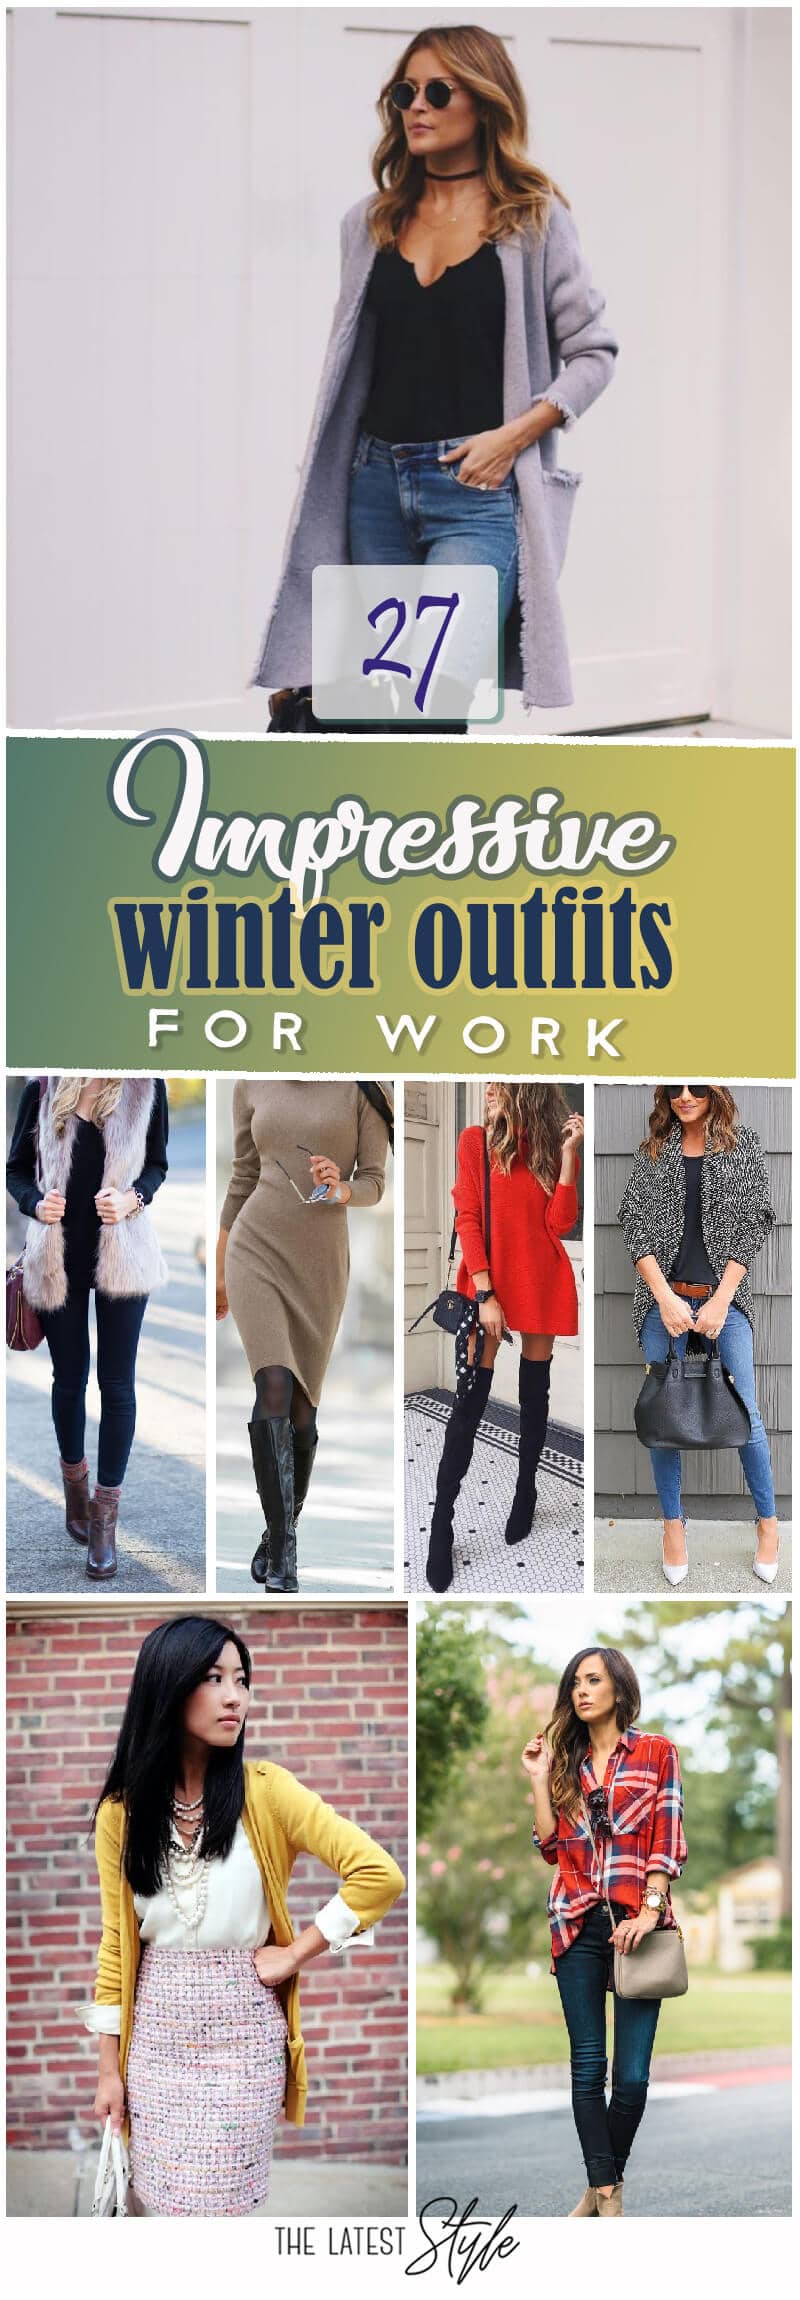 27 Impressive Winter Outfits for Work Gatherings